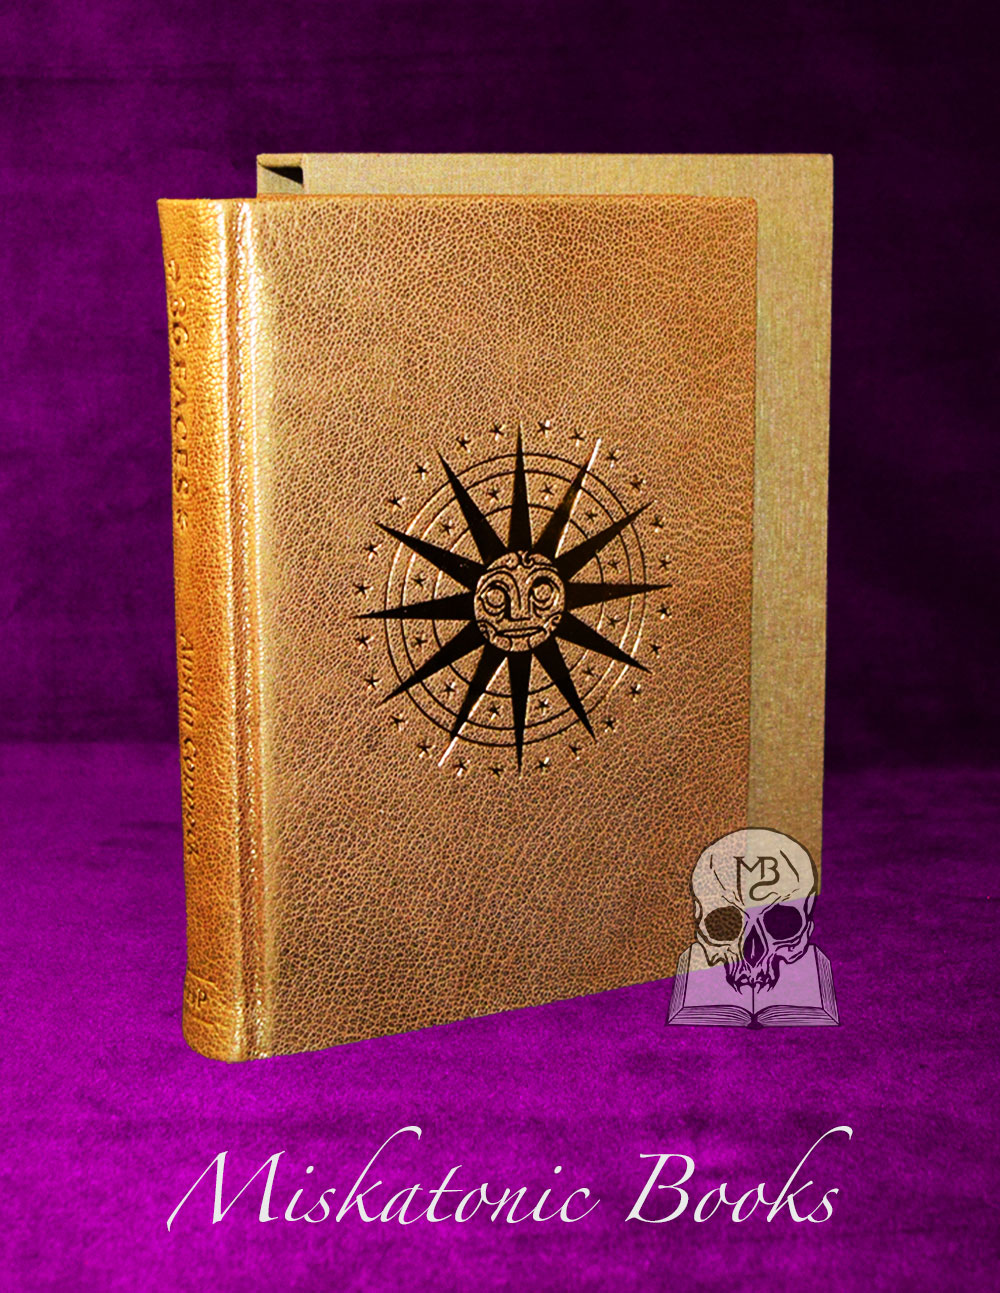 36 FACES The History, Astrology and Magic of the Decans by Austin Coppock - DELUXE SPECIAL Leather Bound Limited Edition in Custom Slipcase